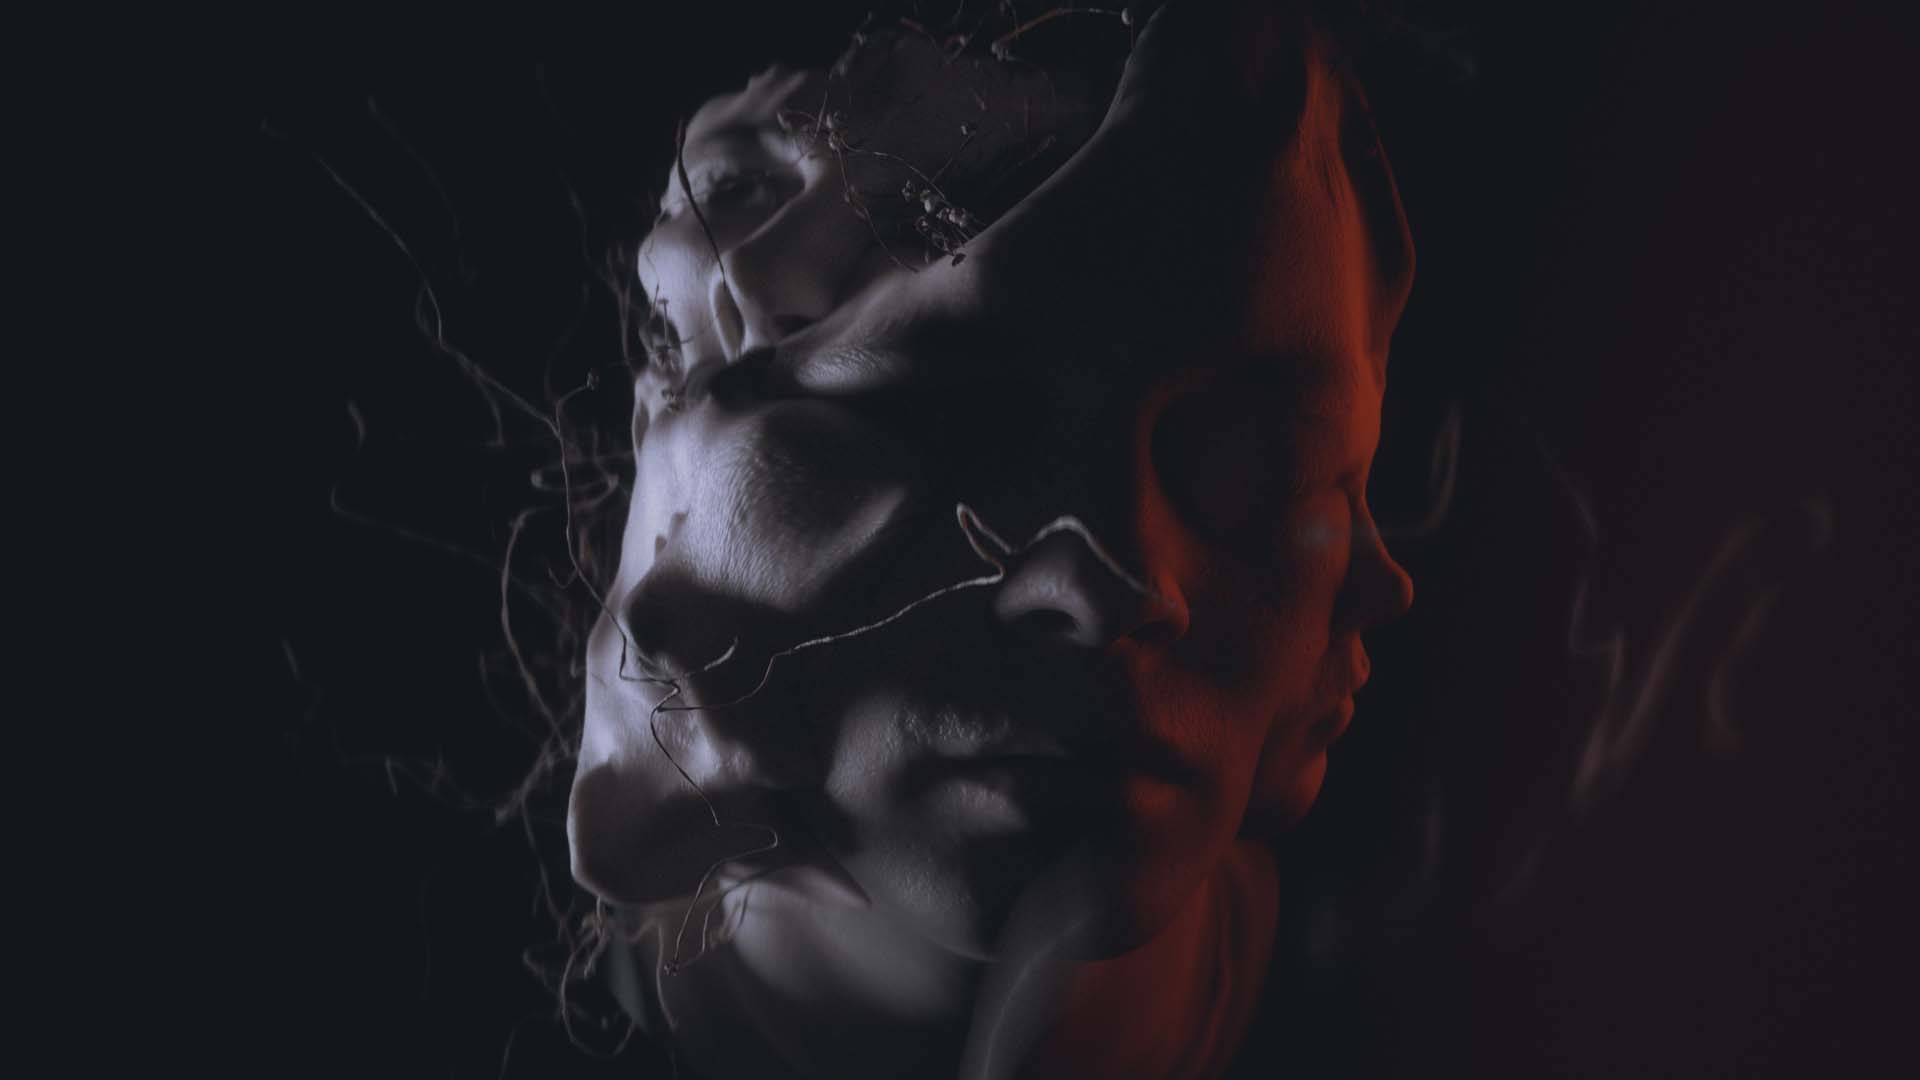 Another facial distortion from the Nightflyers promo